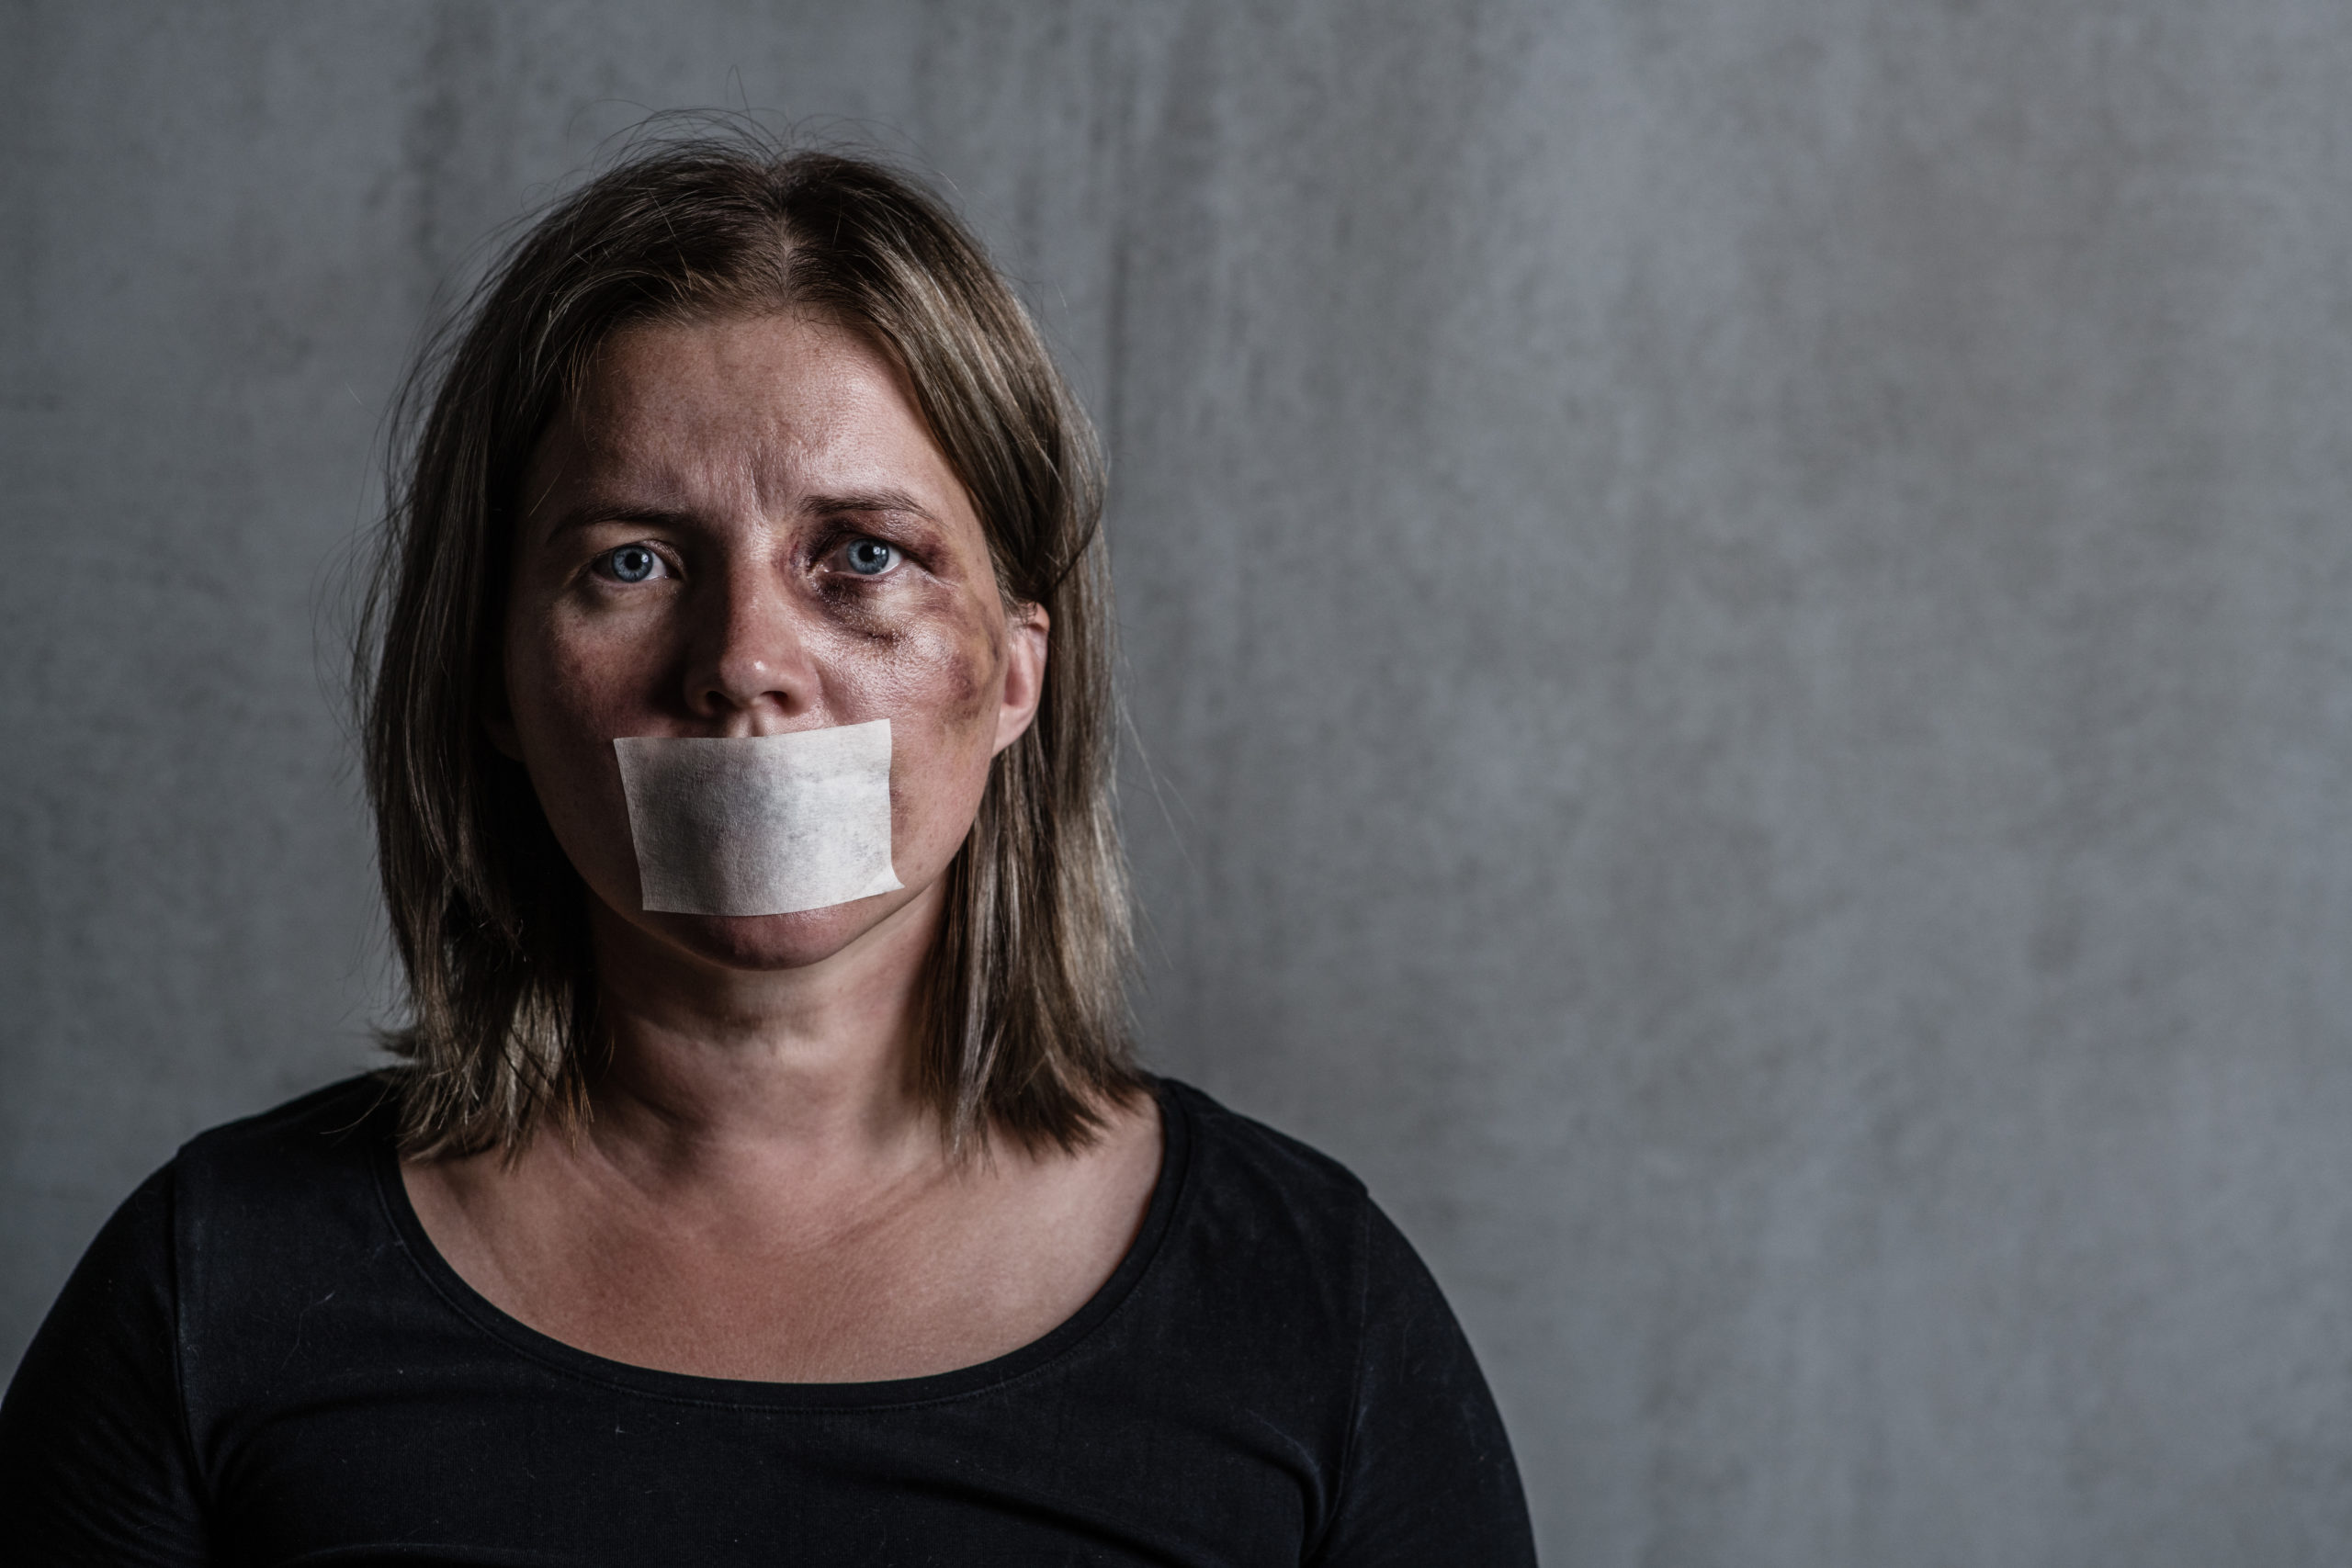 Beaten up woman victim of domestic violence and abusewith covered her mouth.